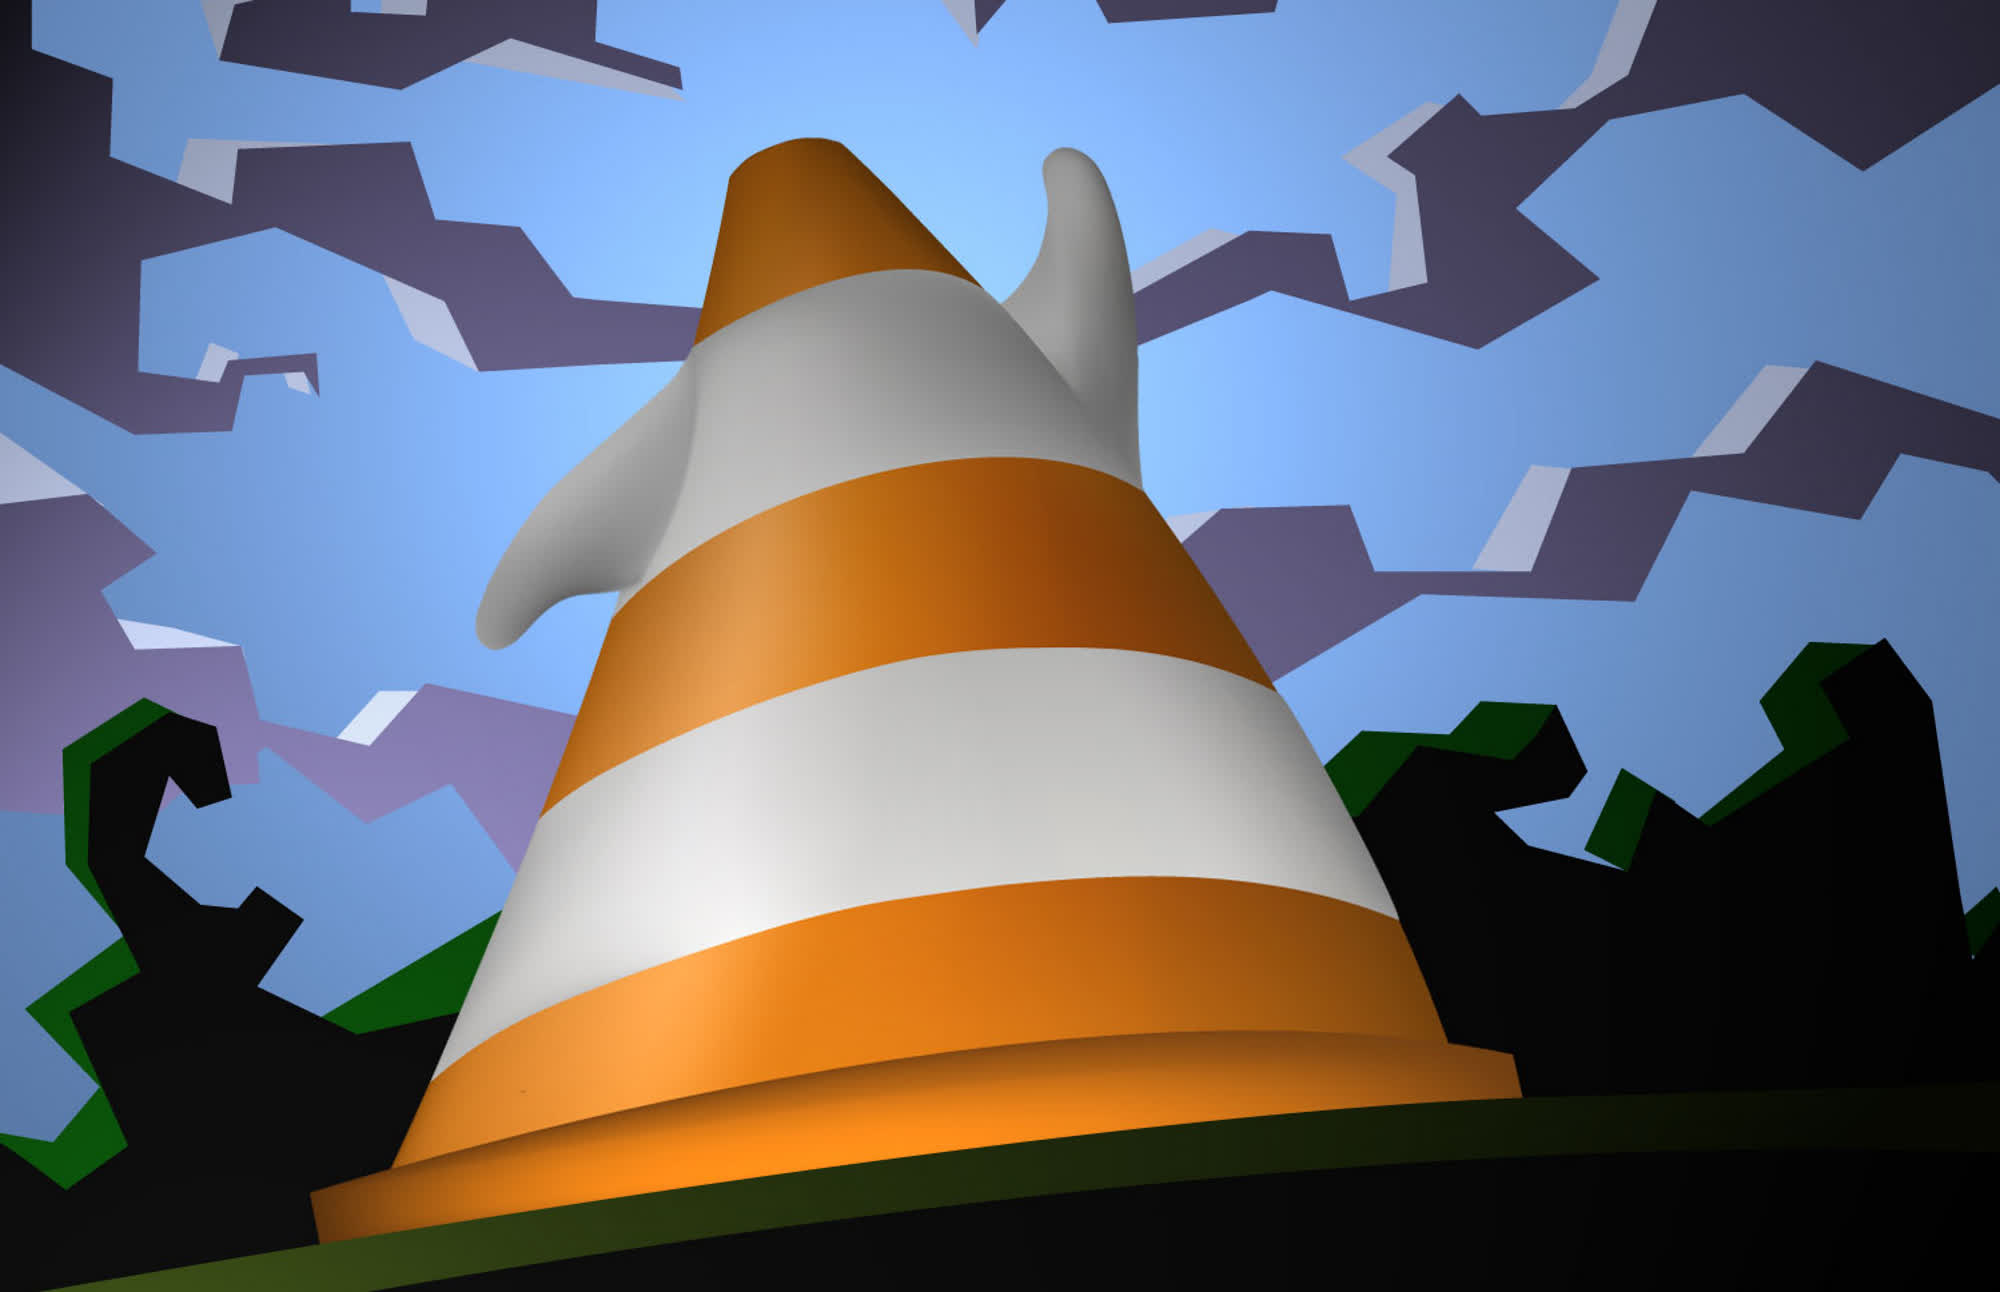 VLC media player adds support for new formats, improves streaming support, and more